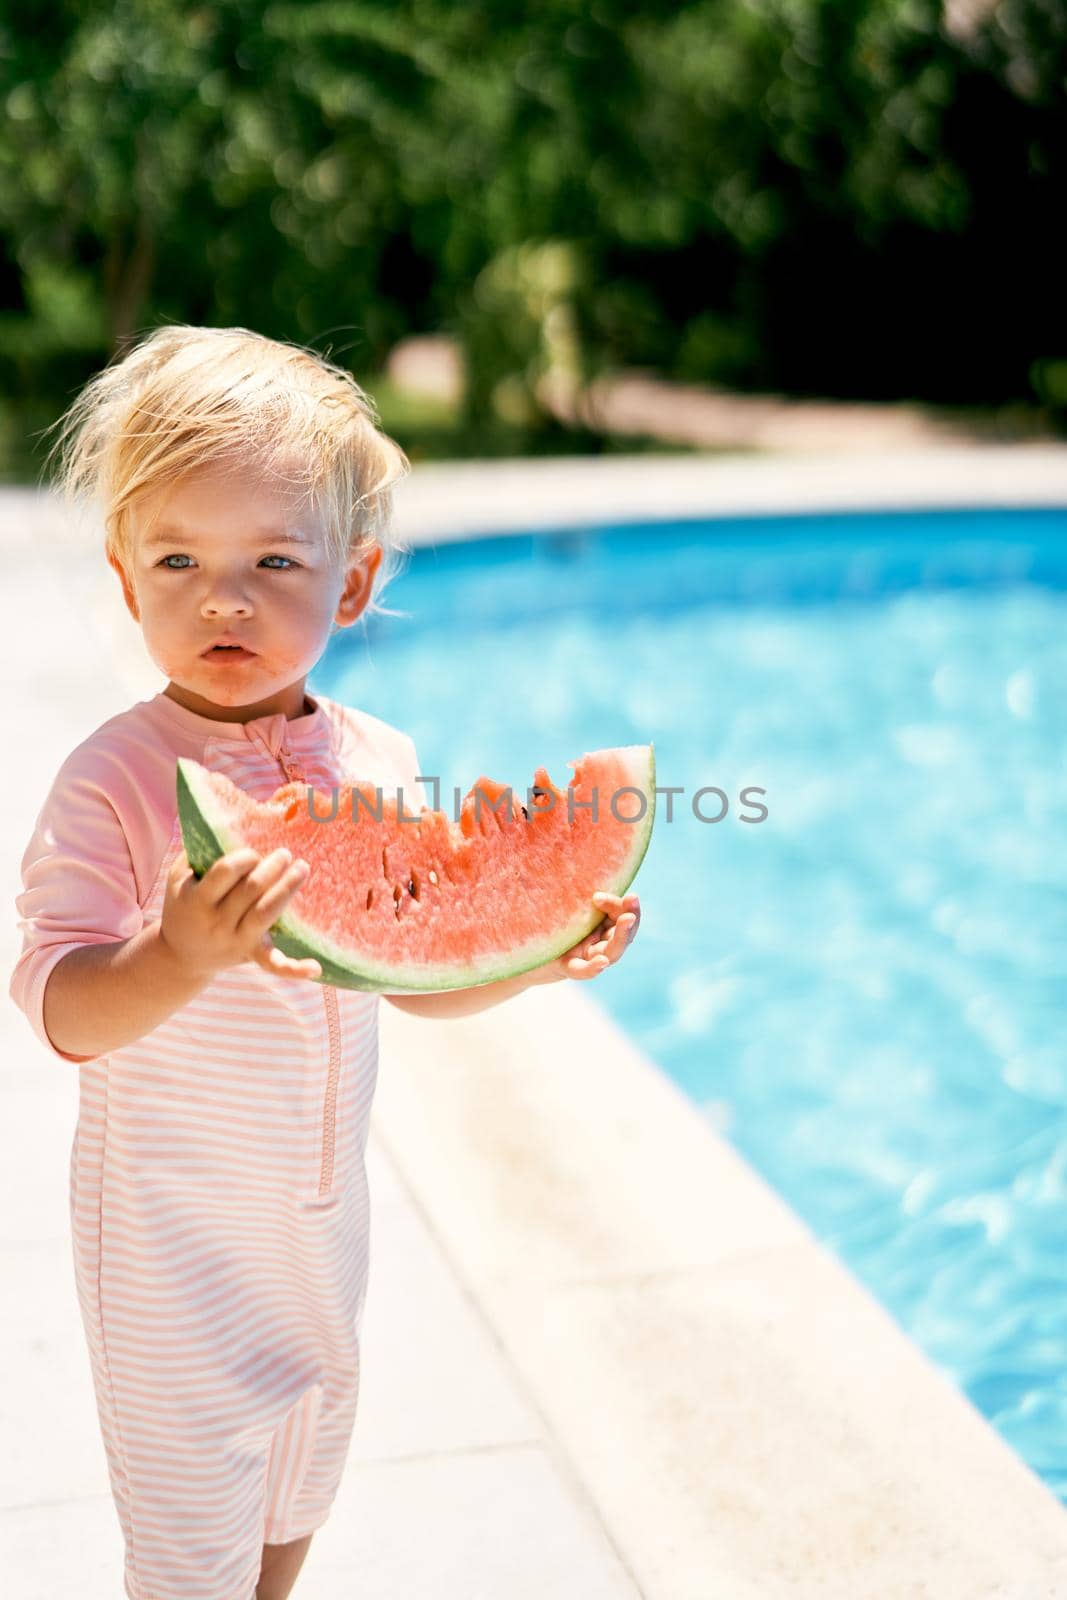 Little girl with a piece of a watermelon near the pool with turquoise water. High quality photo